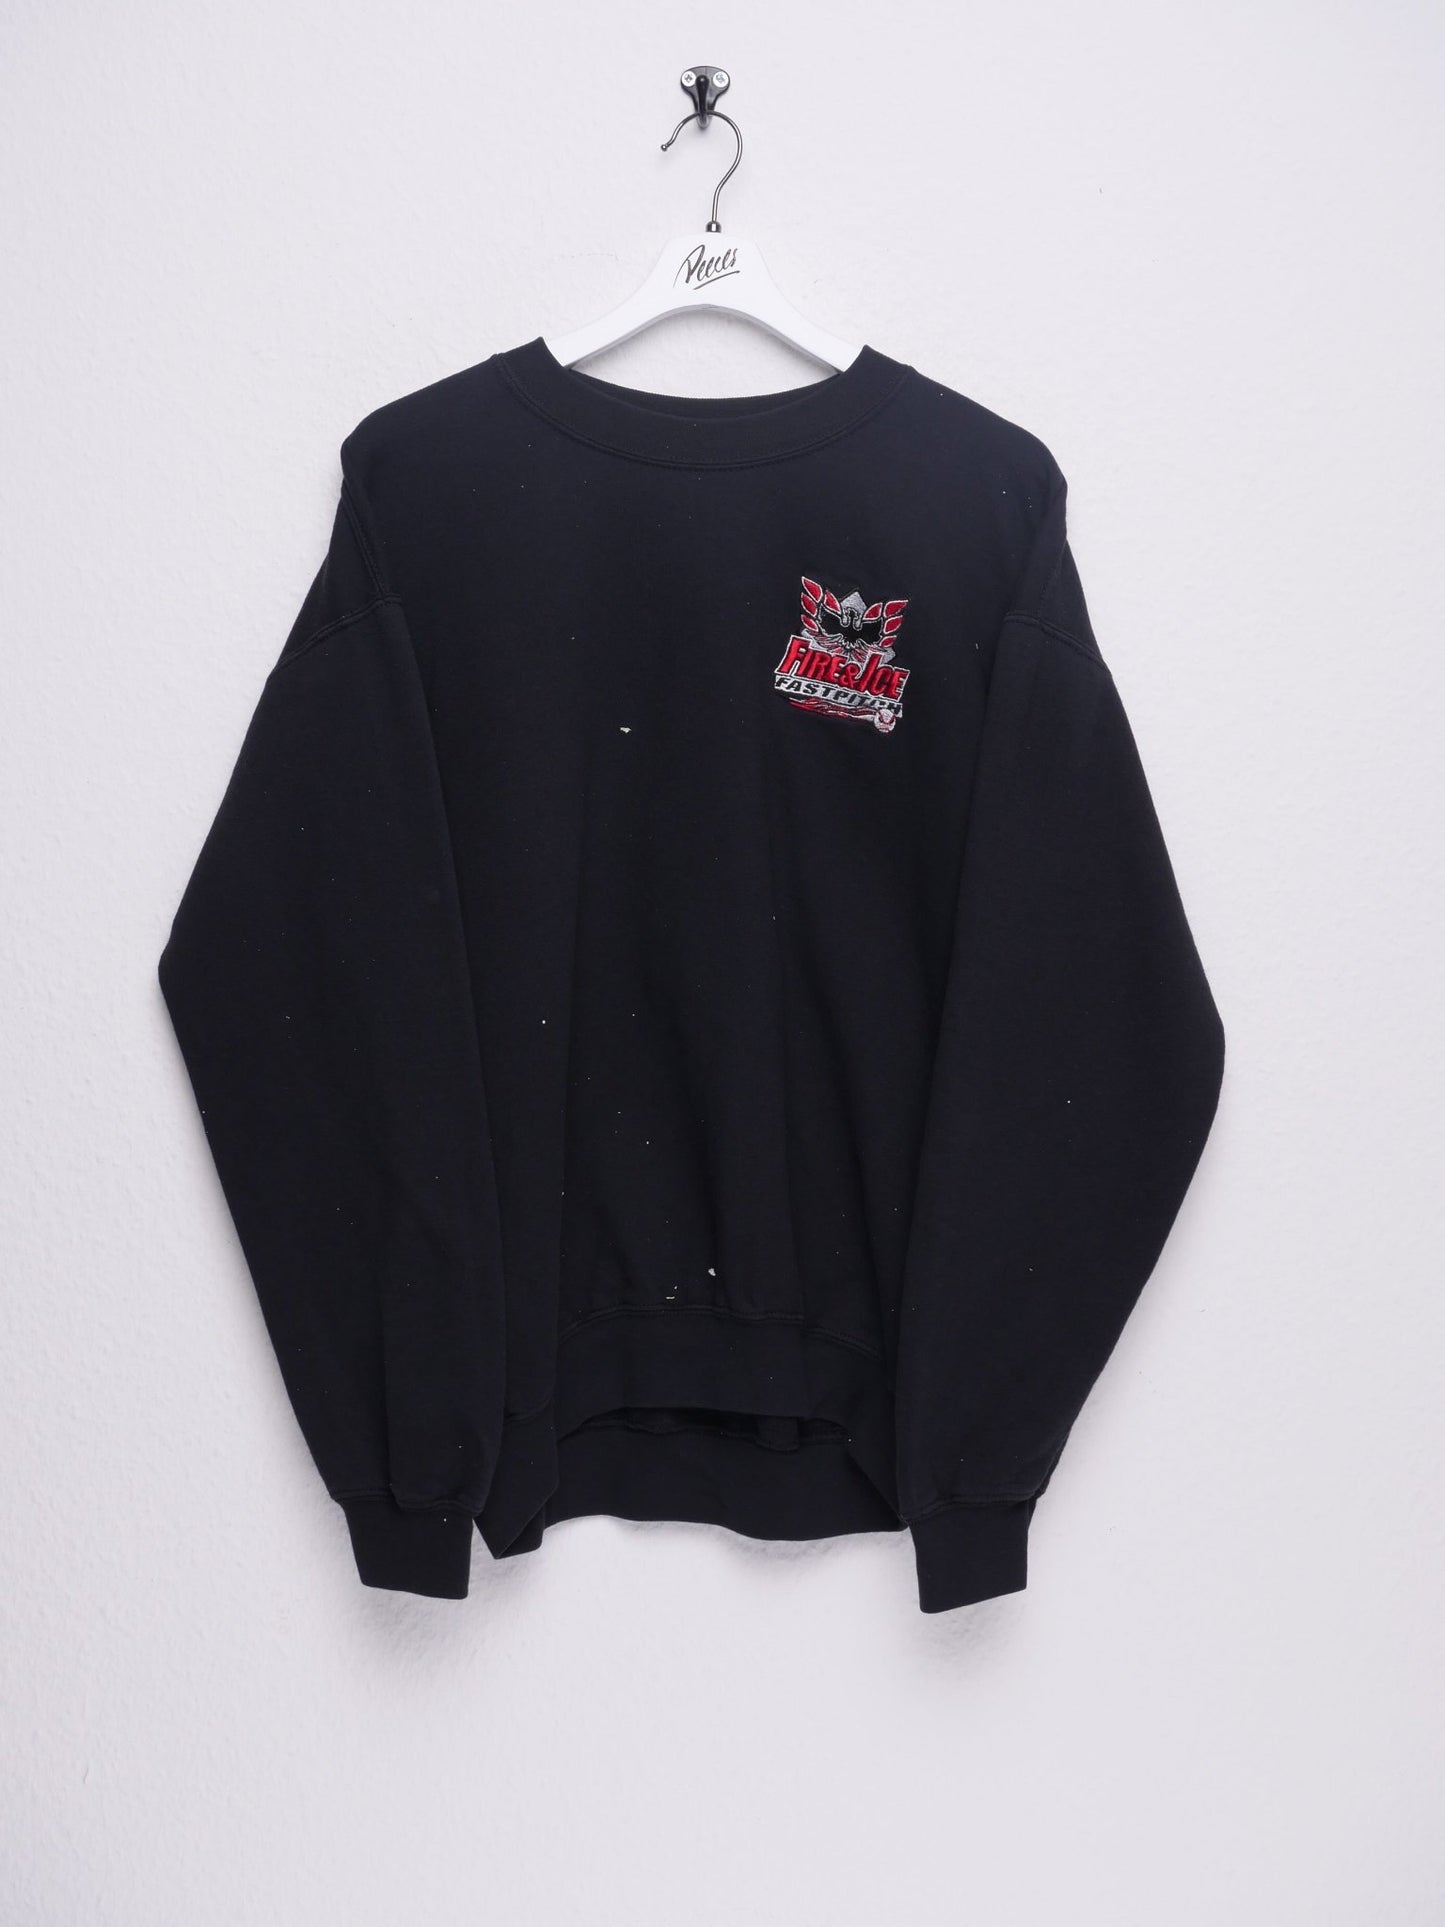 Fire & Ice embroidered Logo black Sweater - Peeces